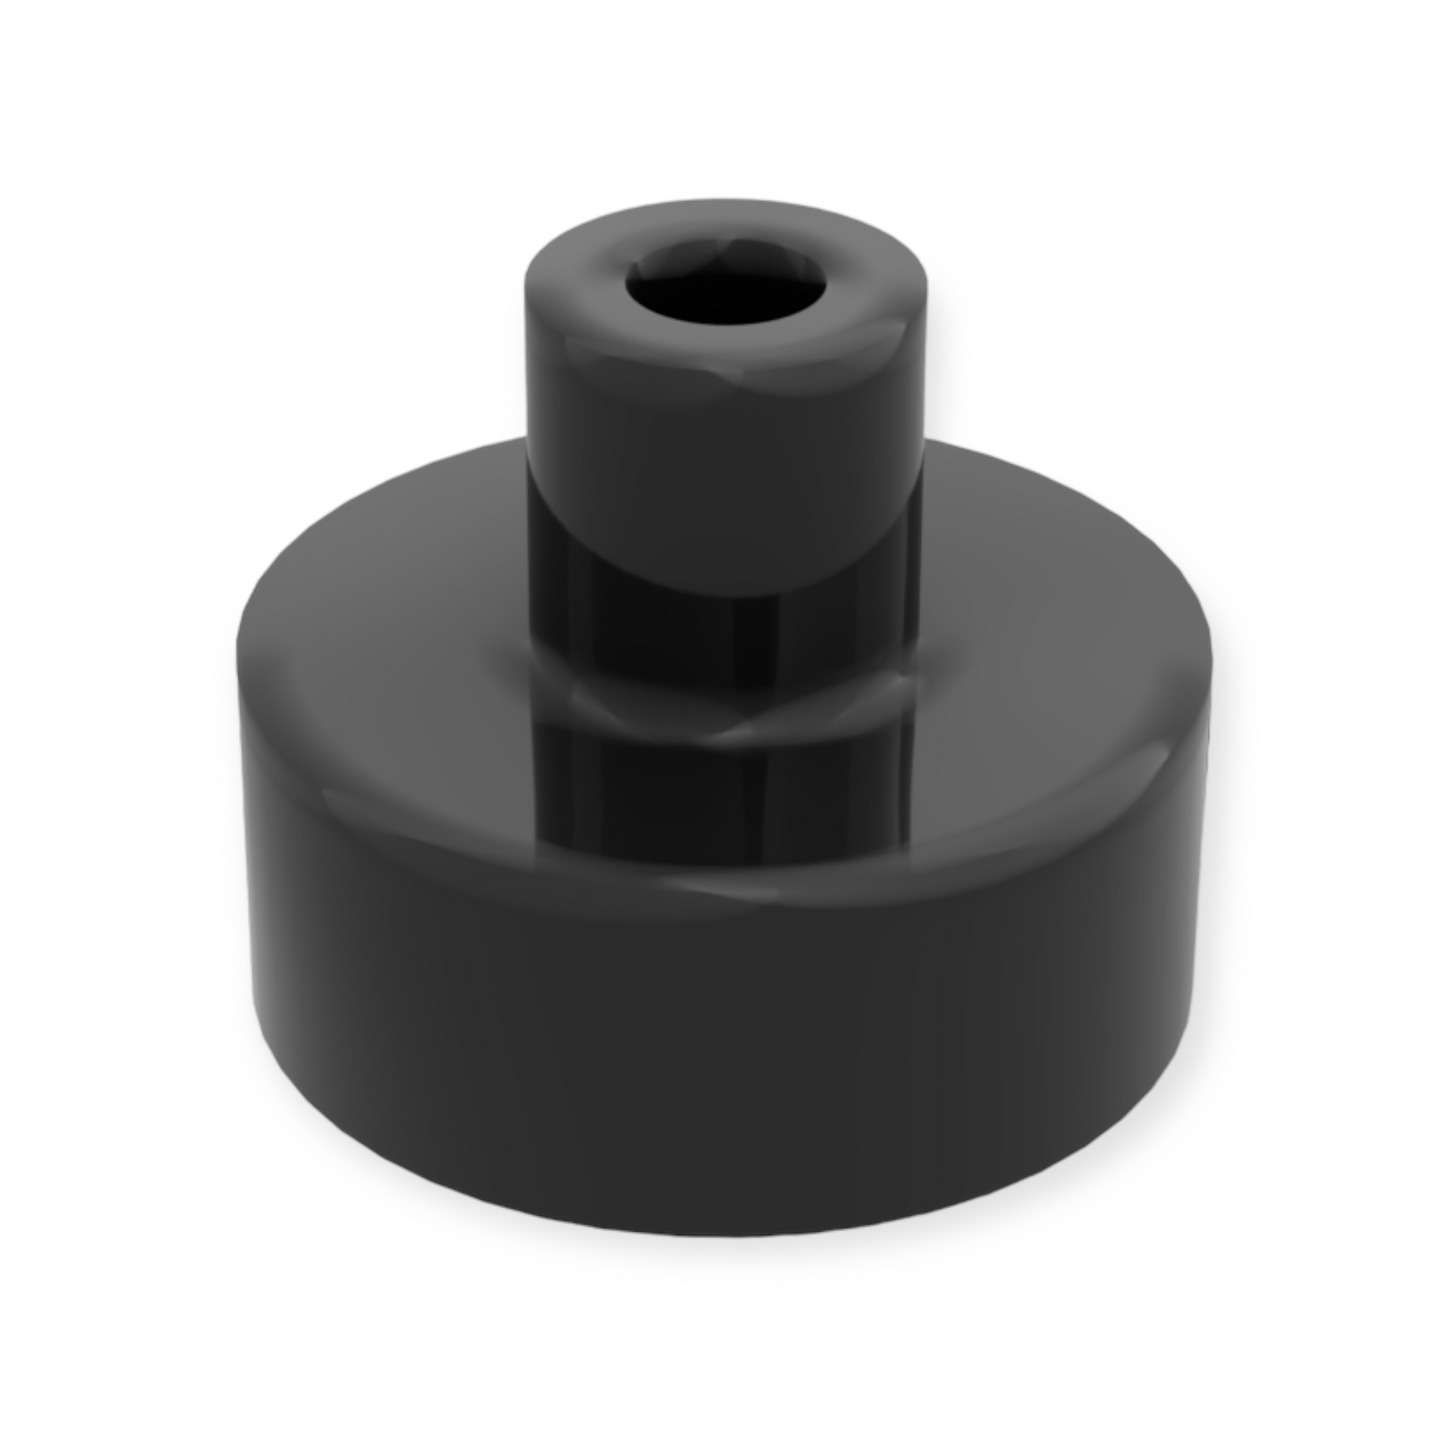 LEGO Tile Round 1x1 with Bar and Pin Holder - Black